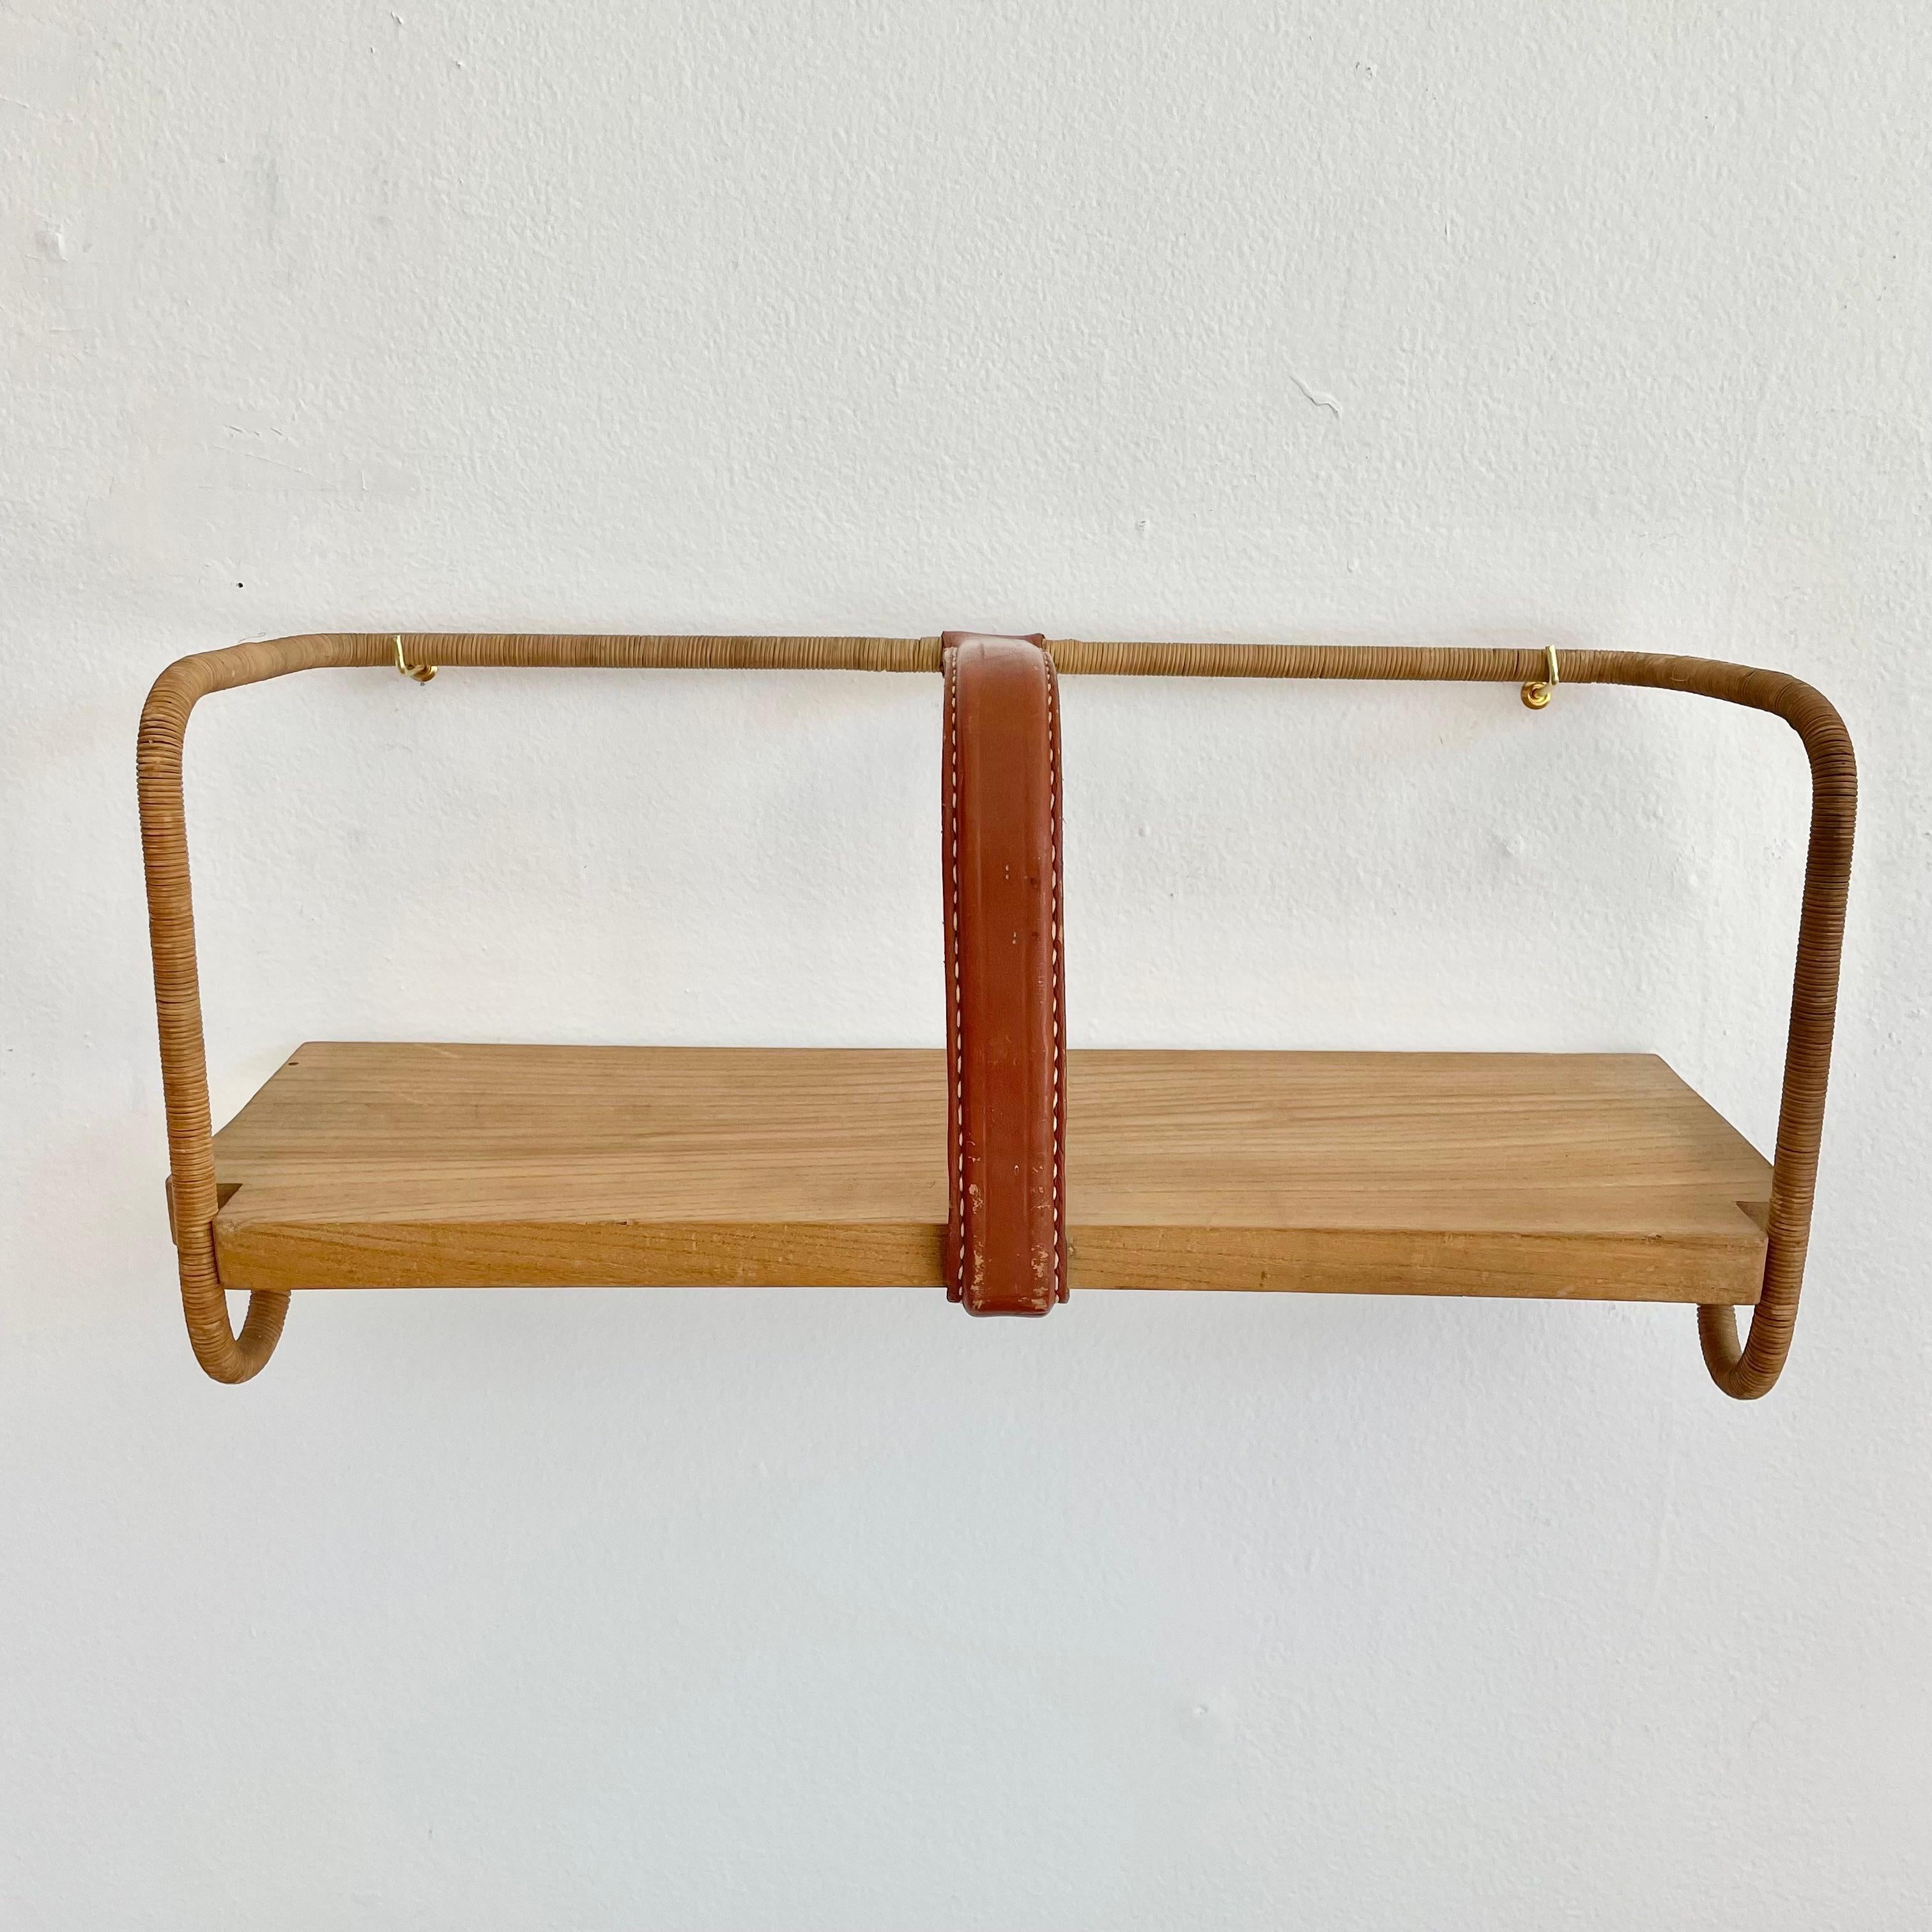 Sculptural shelf by French modernist designer, Jacques Adnet. A simple yet elegant design with a thick wooden shelf held together by a metal frame. Leather divider right in the middle with signature Adnet contrast stitching. Metal completely wrapped